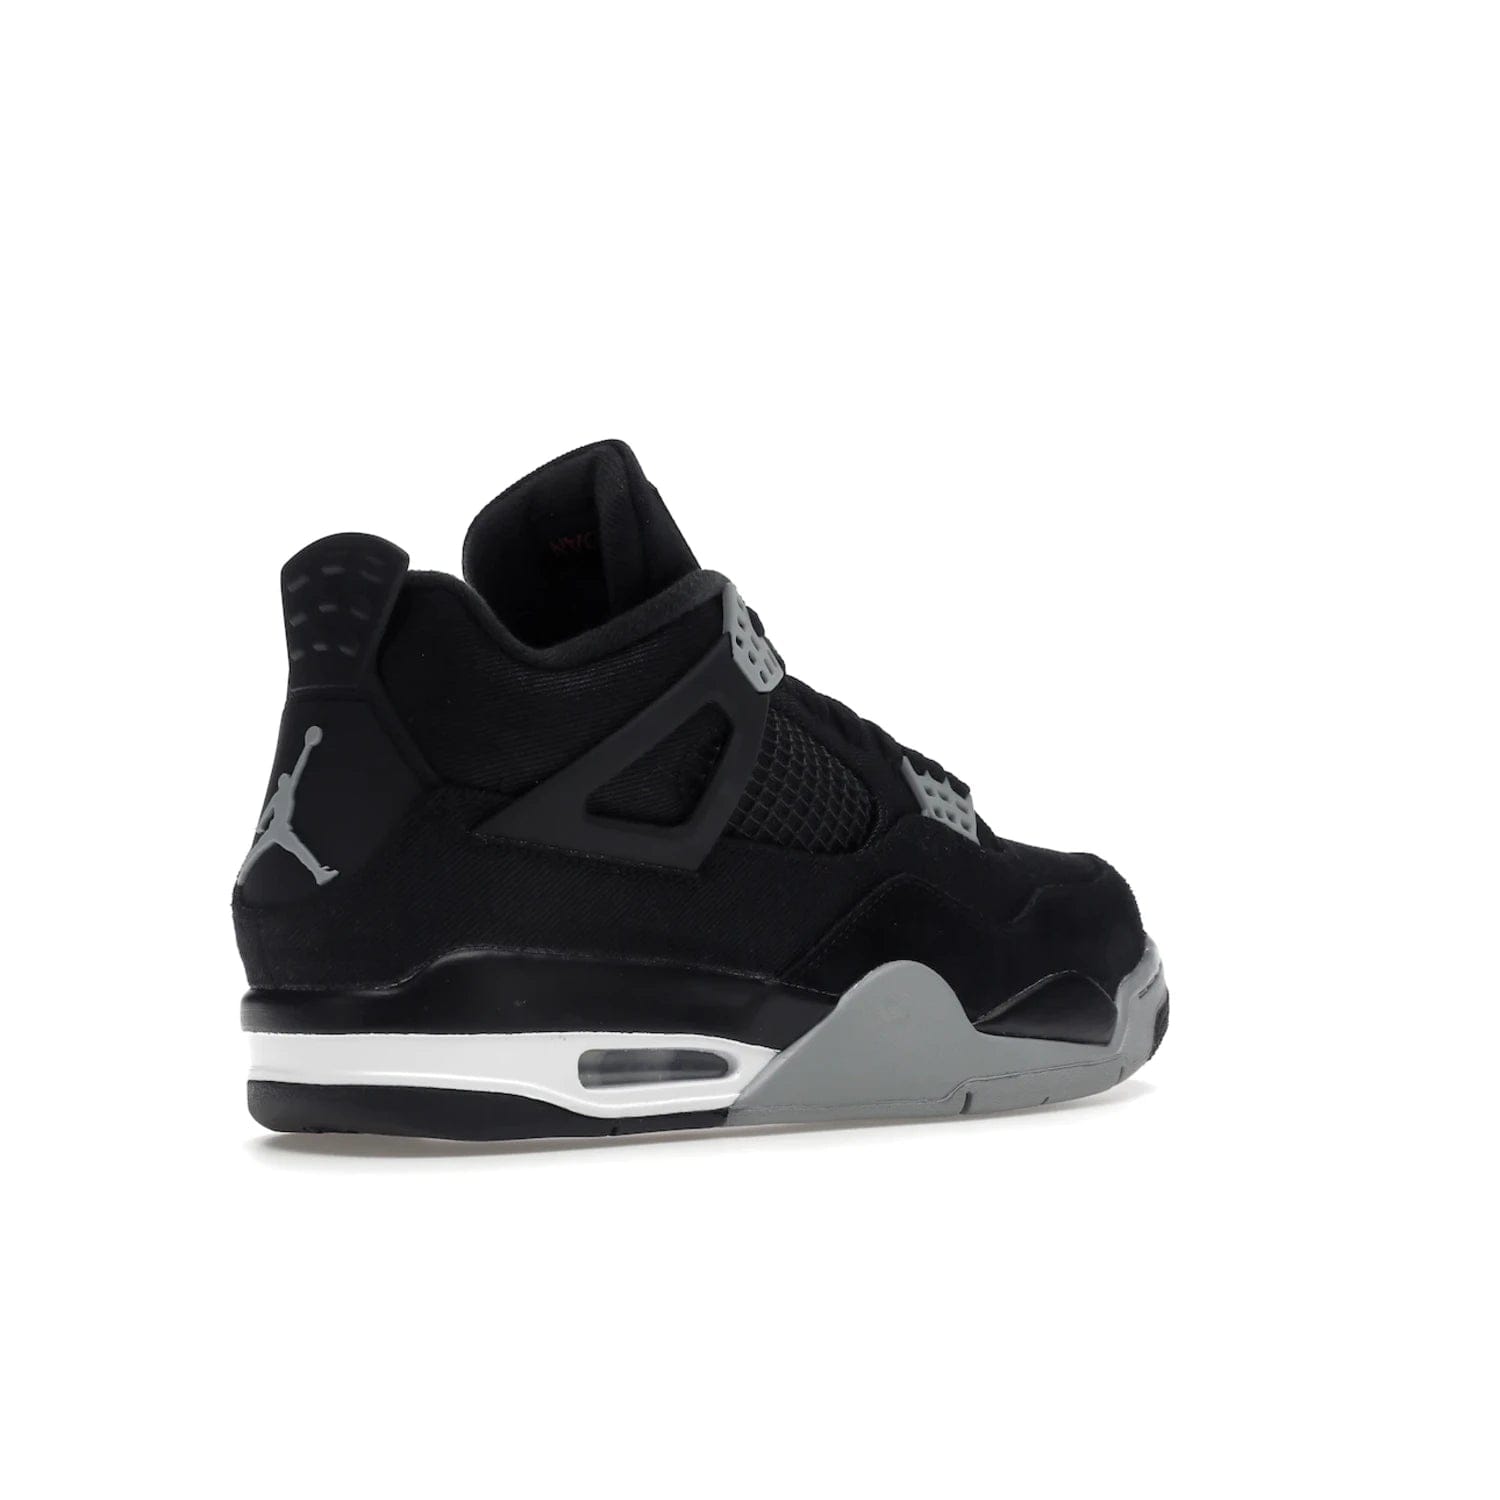 Jordan 4 Retro SE Black Canvas - Image 33 - Only at www.BallersClubKickz.com - The Air Jordan 4 Retro SE Black Canvas brings timeless style and modern luxury. Classic mid-top sneaker in black canvas and grey suede with tonal Jumpman logo, Flight logo and polyurethane midsole with visible Air-sole cushioning. Refresh your sneaker collection and rock the Air Jordan 4 Retro SE Black Canvas.